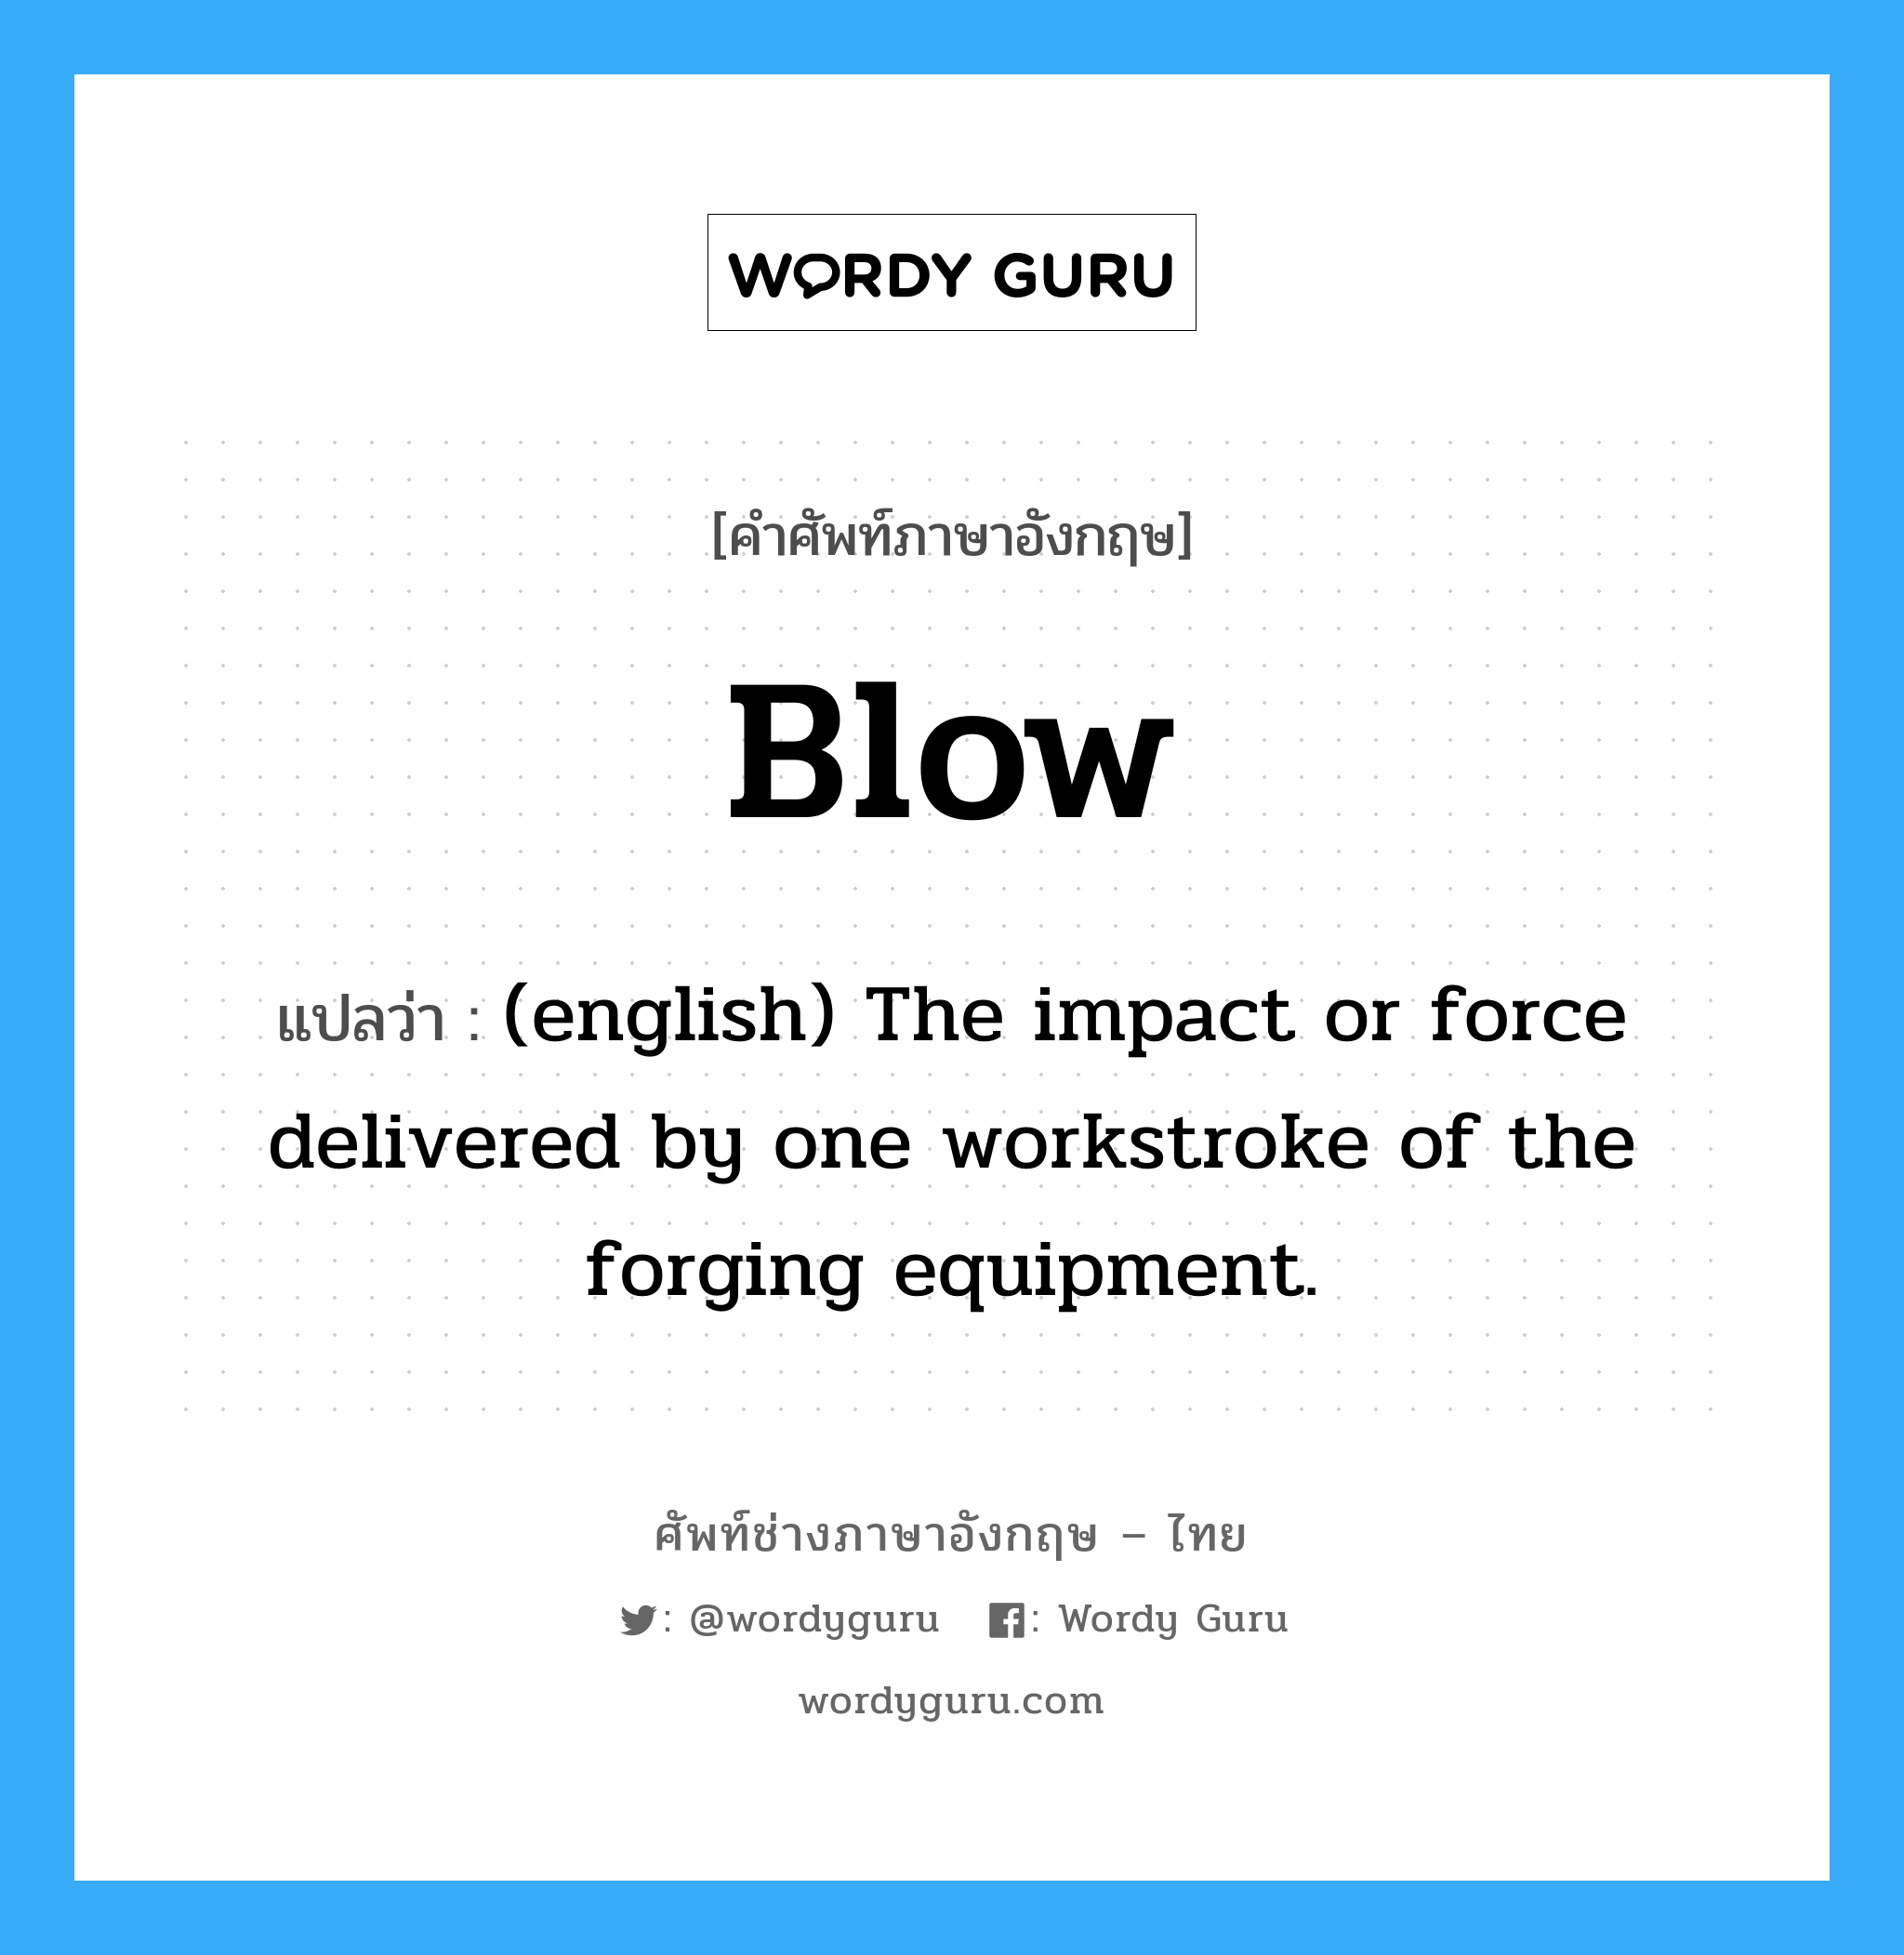 Blow แปลว่า?, คำศัพท์ช่างภาษาอังกฤษ - ไทย Blow คำศัพท์ภาษาอังกฤษ Blow แปลว่า (english) The impact or force delivered by one workstroke of the forging equipment.